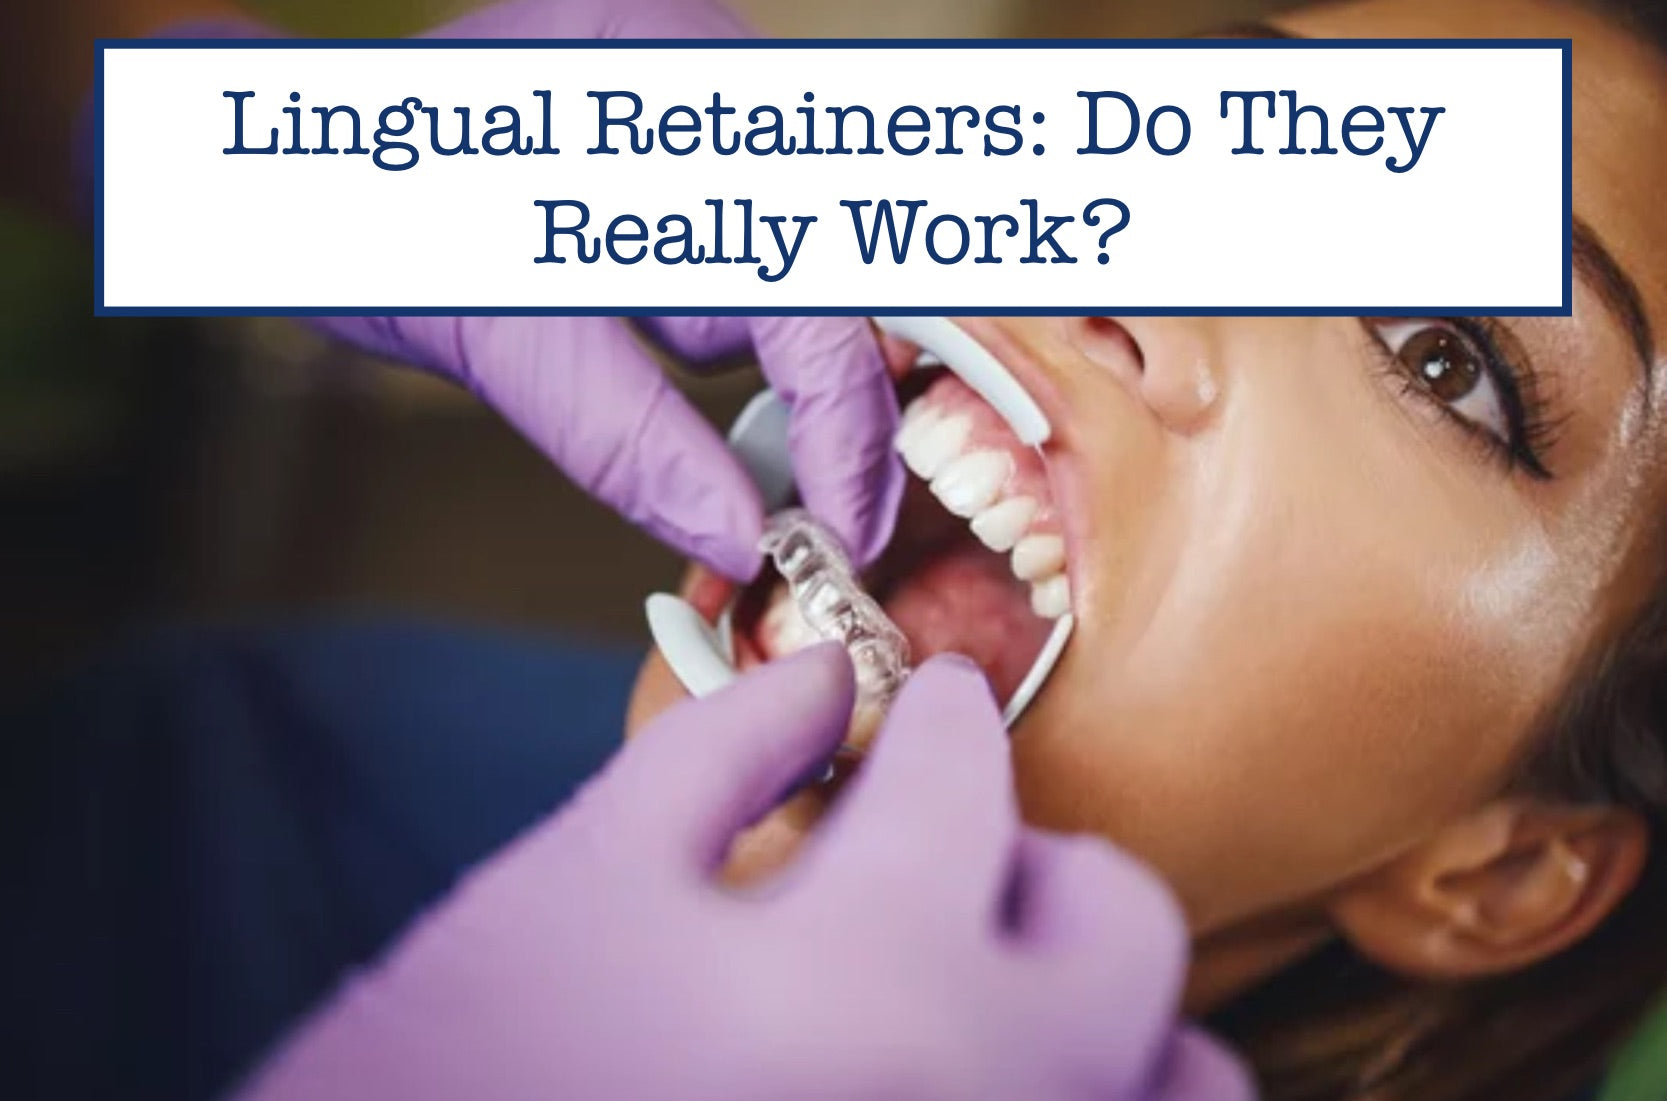 Lingual Retainers: Do They Really Work?